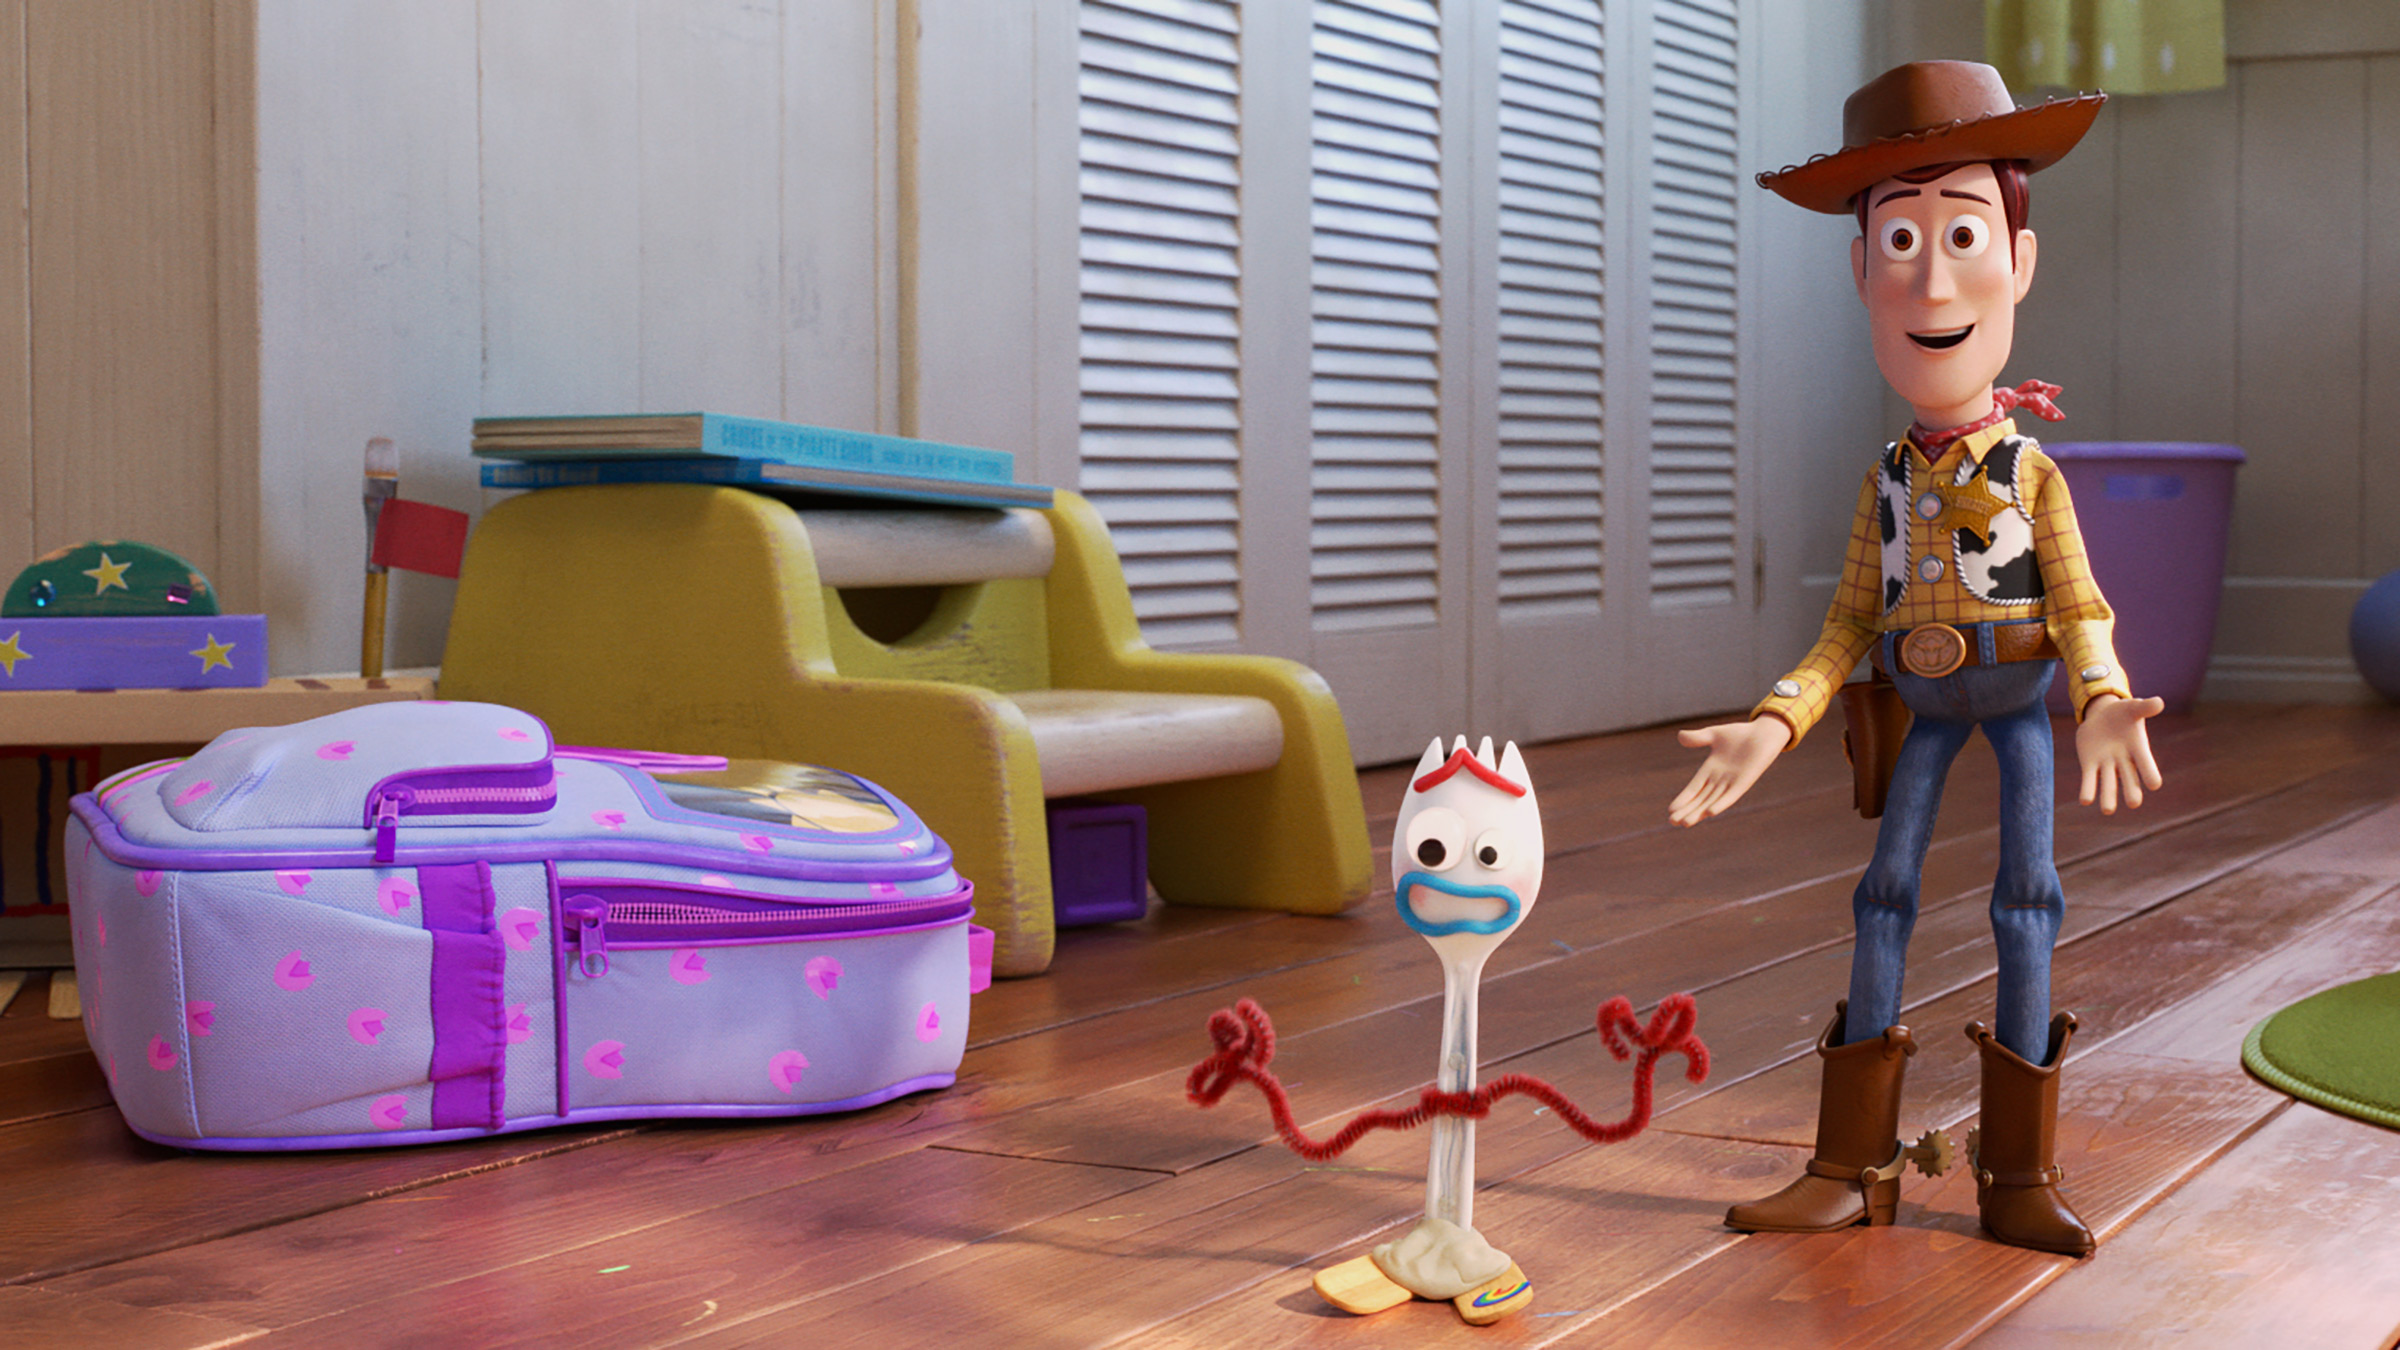 Woody (Hanks) has got a friend—or something—in Forky (Hale).